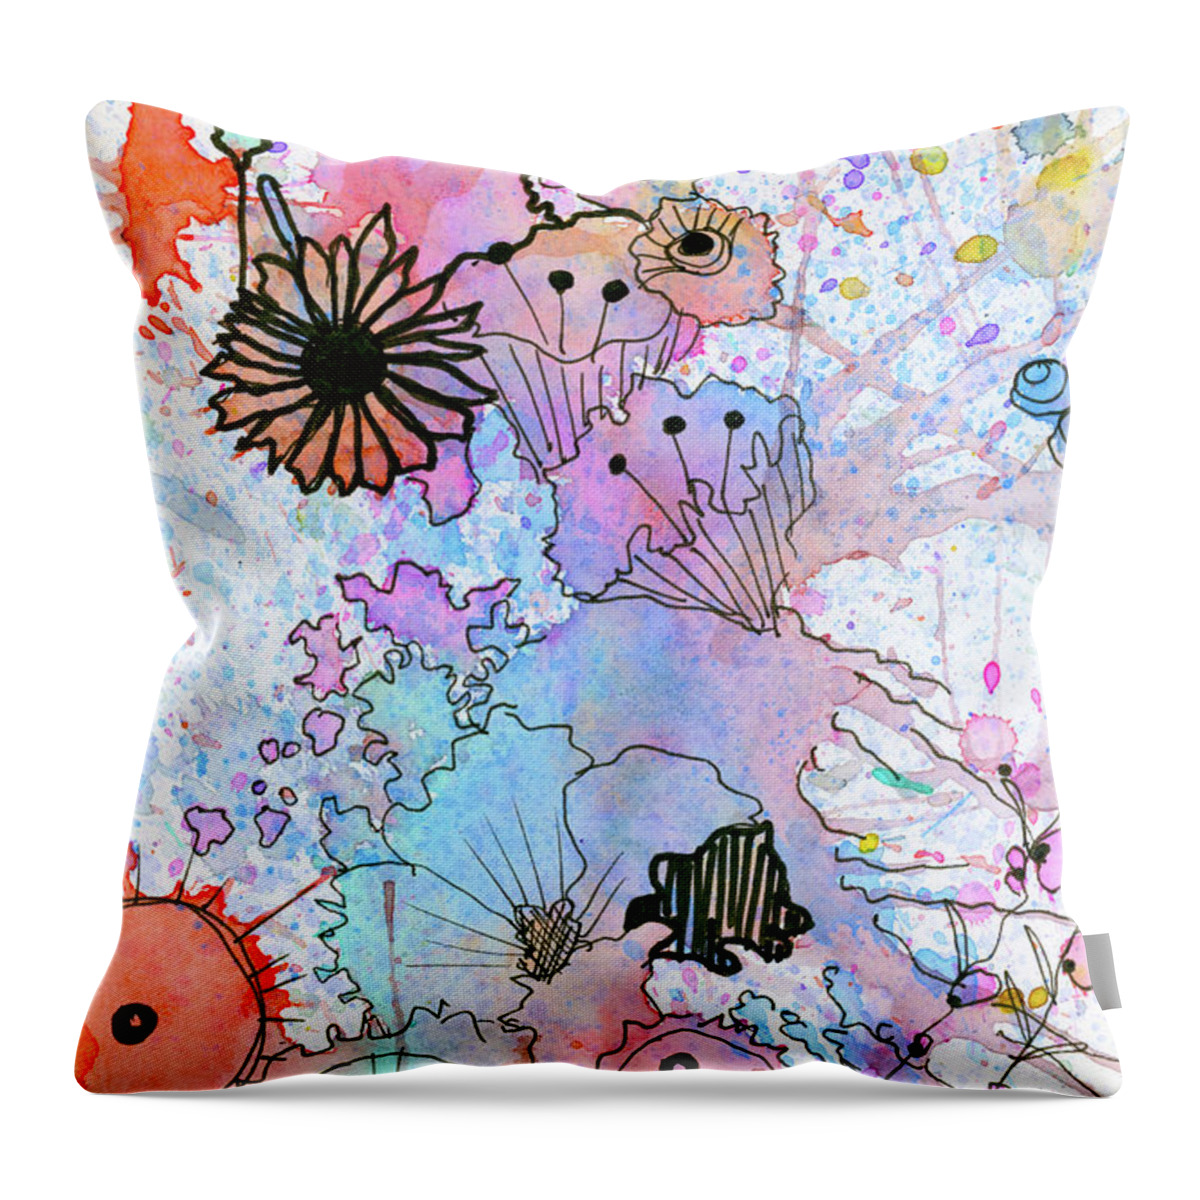  Throw Pillow featuring the painting Sunflower by Madeline Dillner